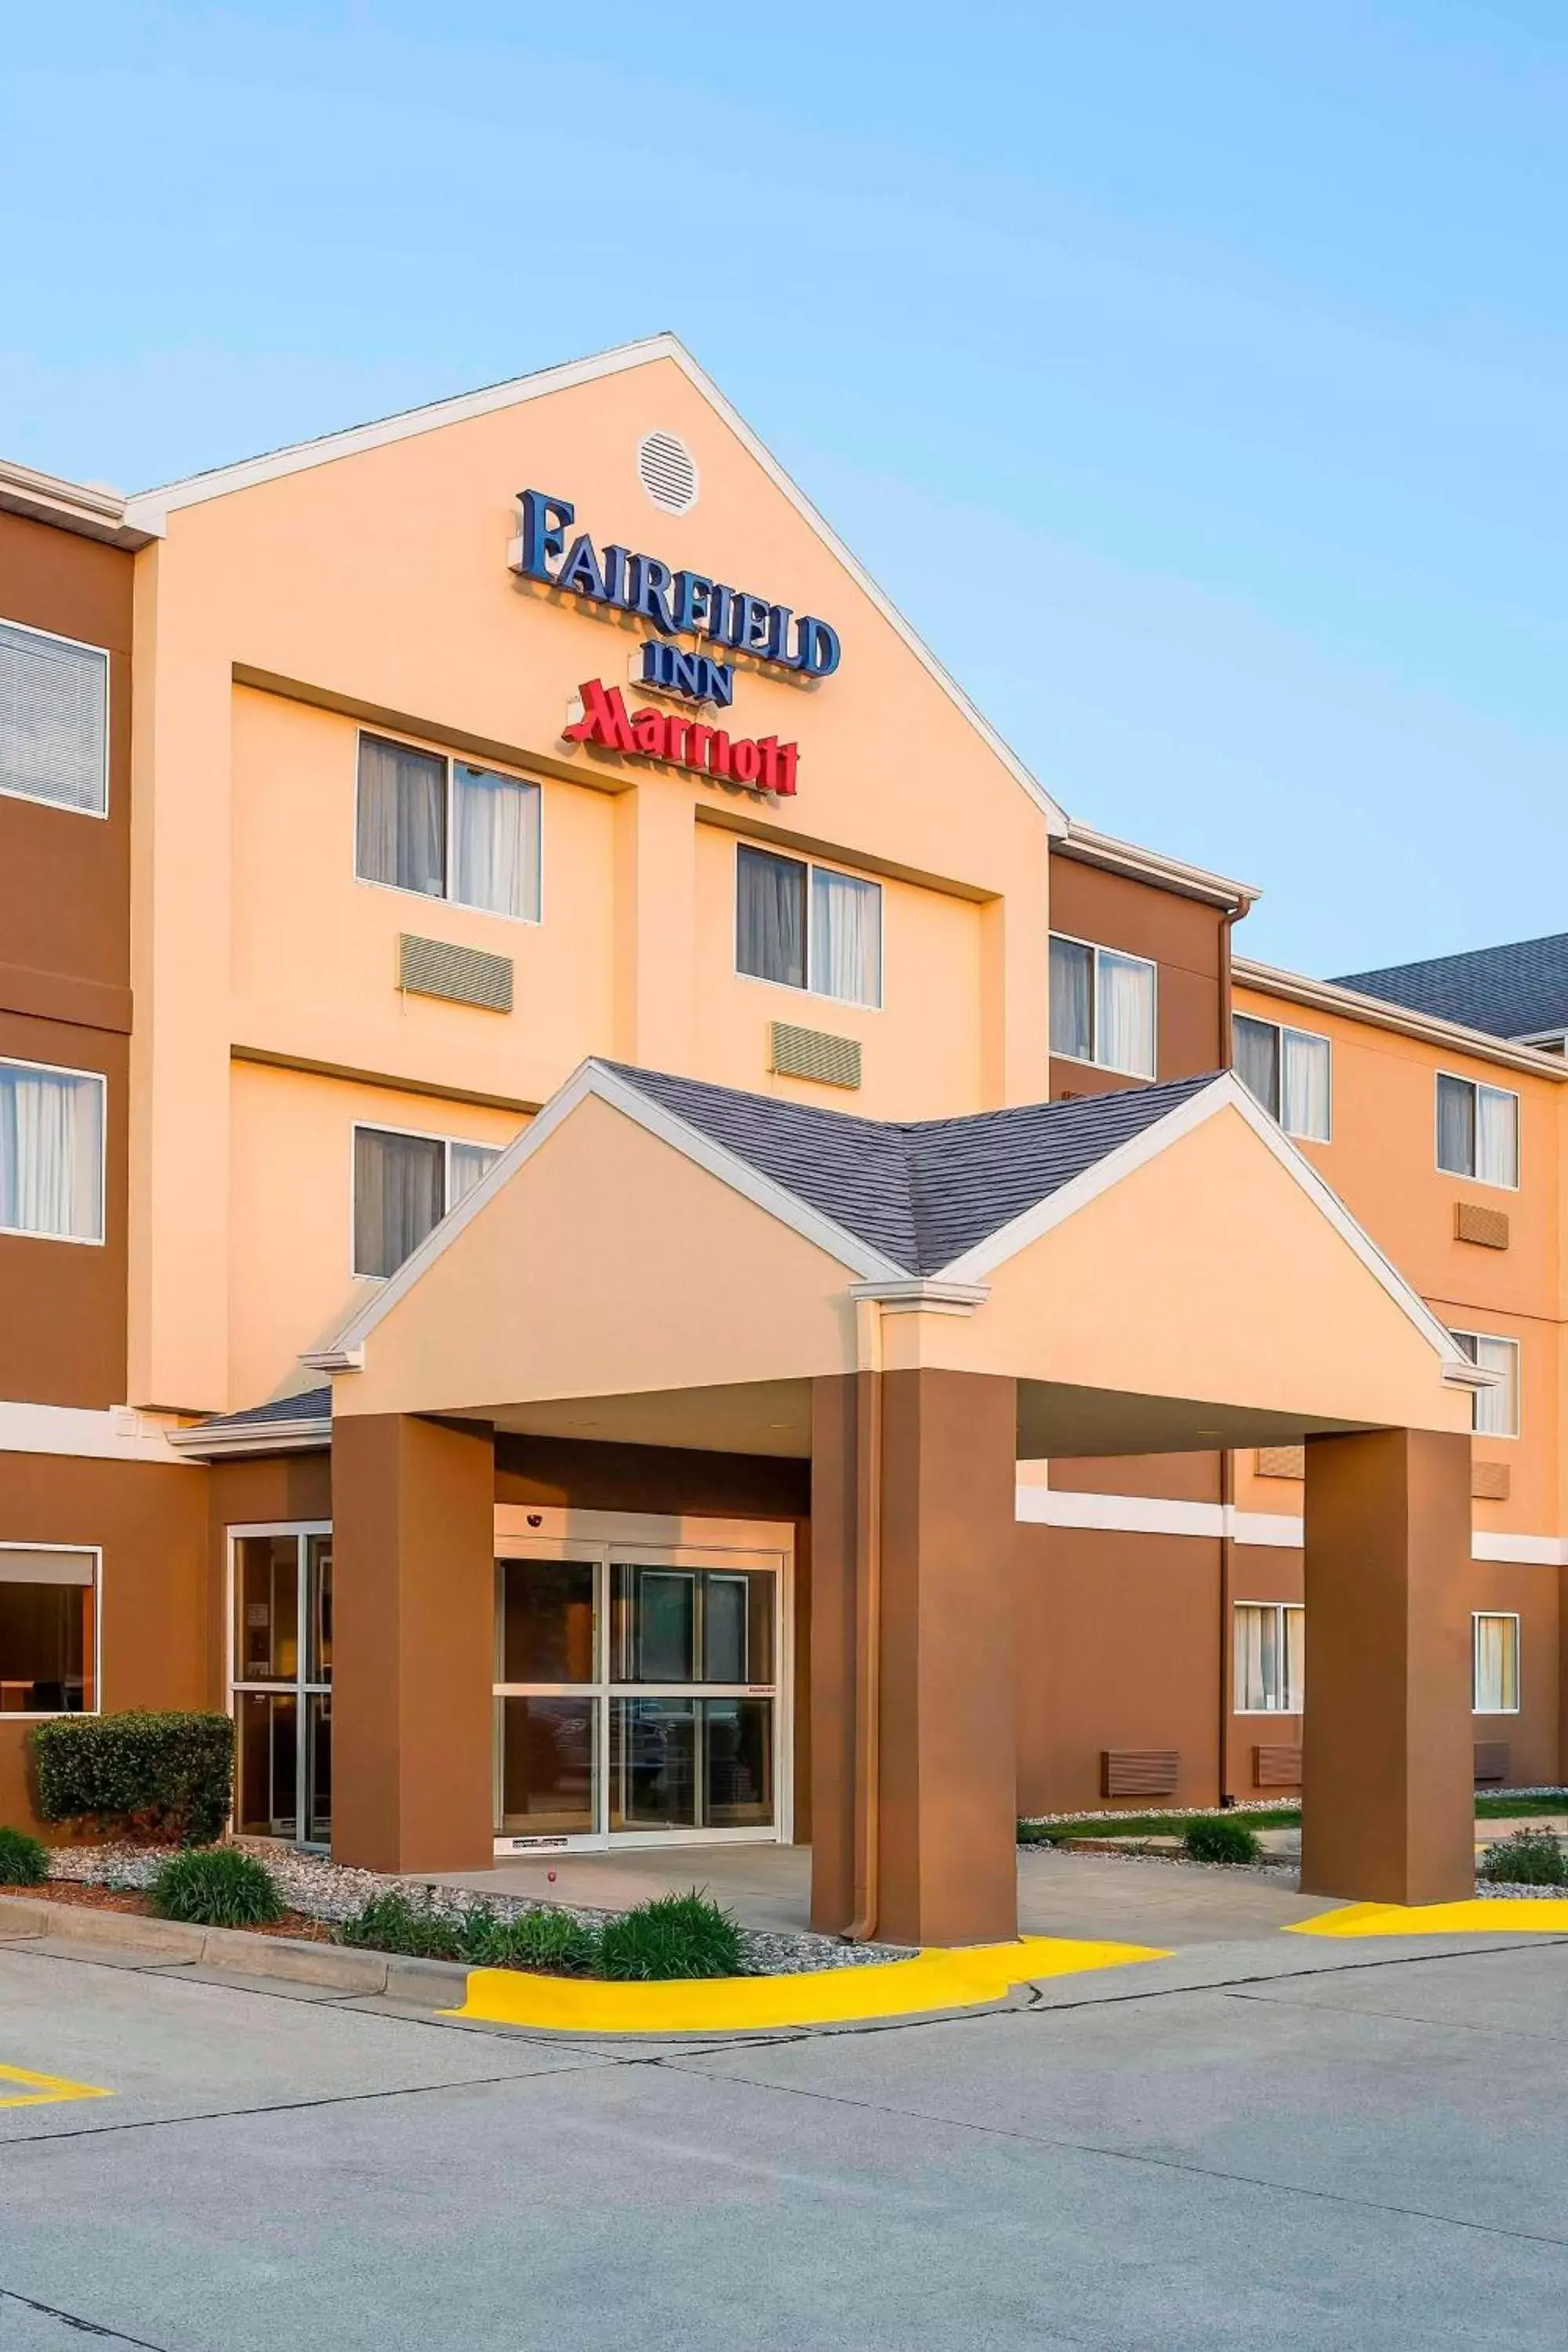 Property Building in Fairfield Inn & Suites Holland